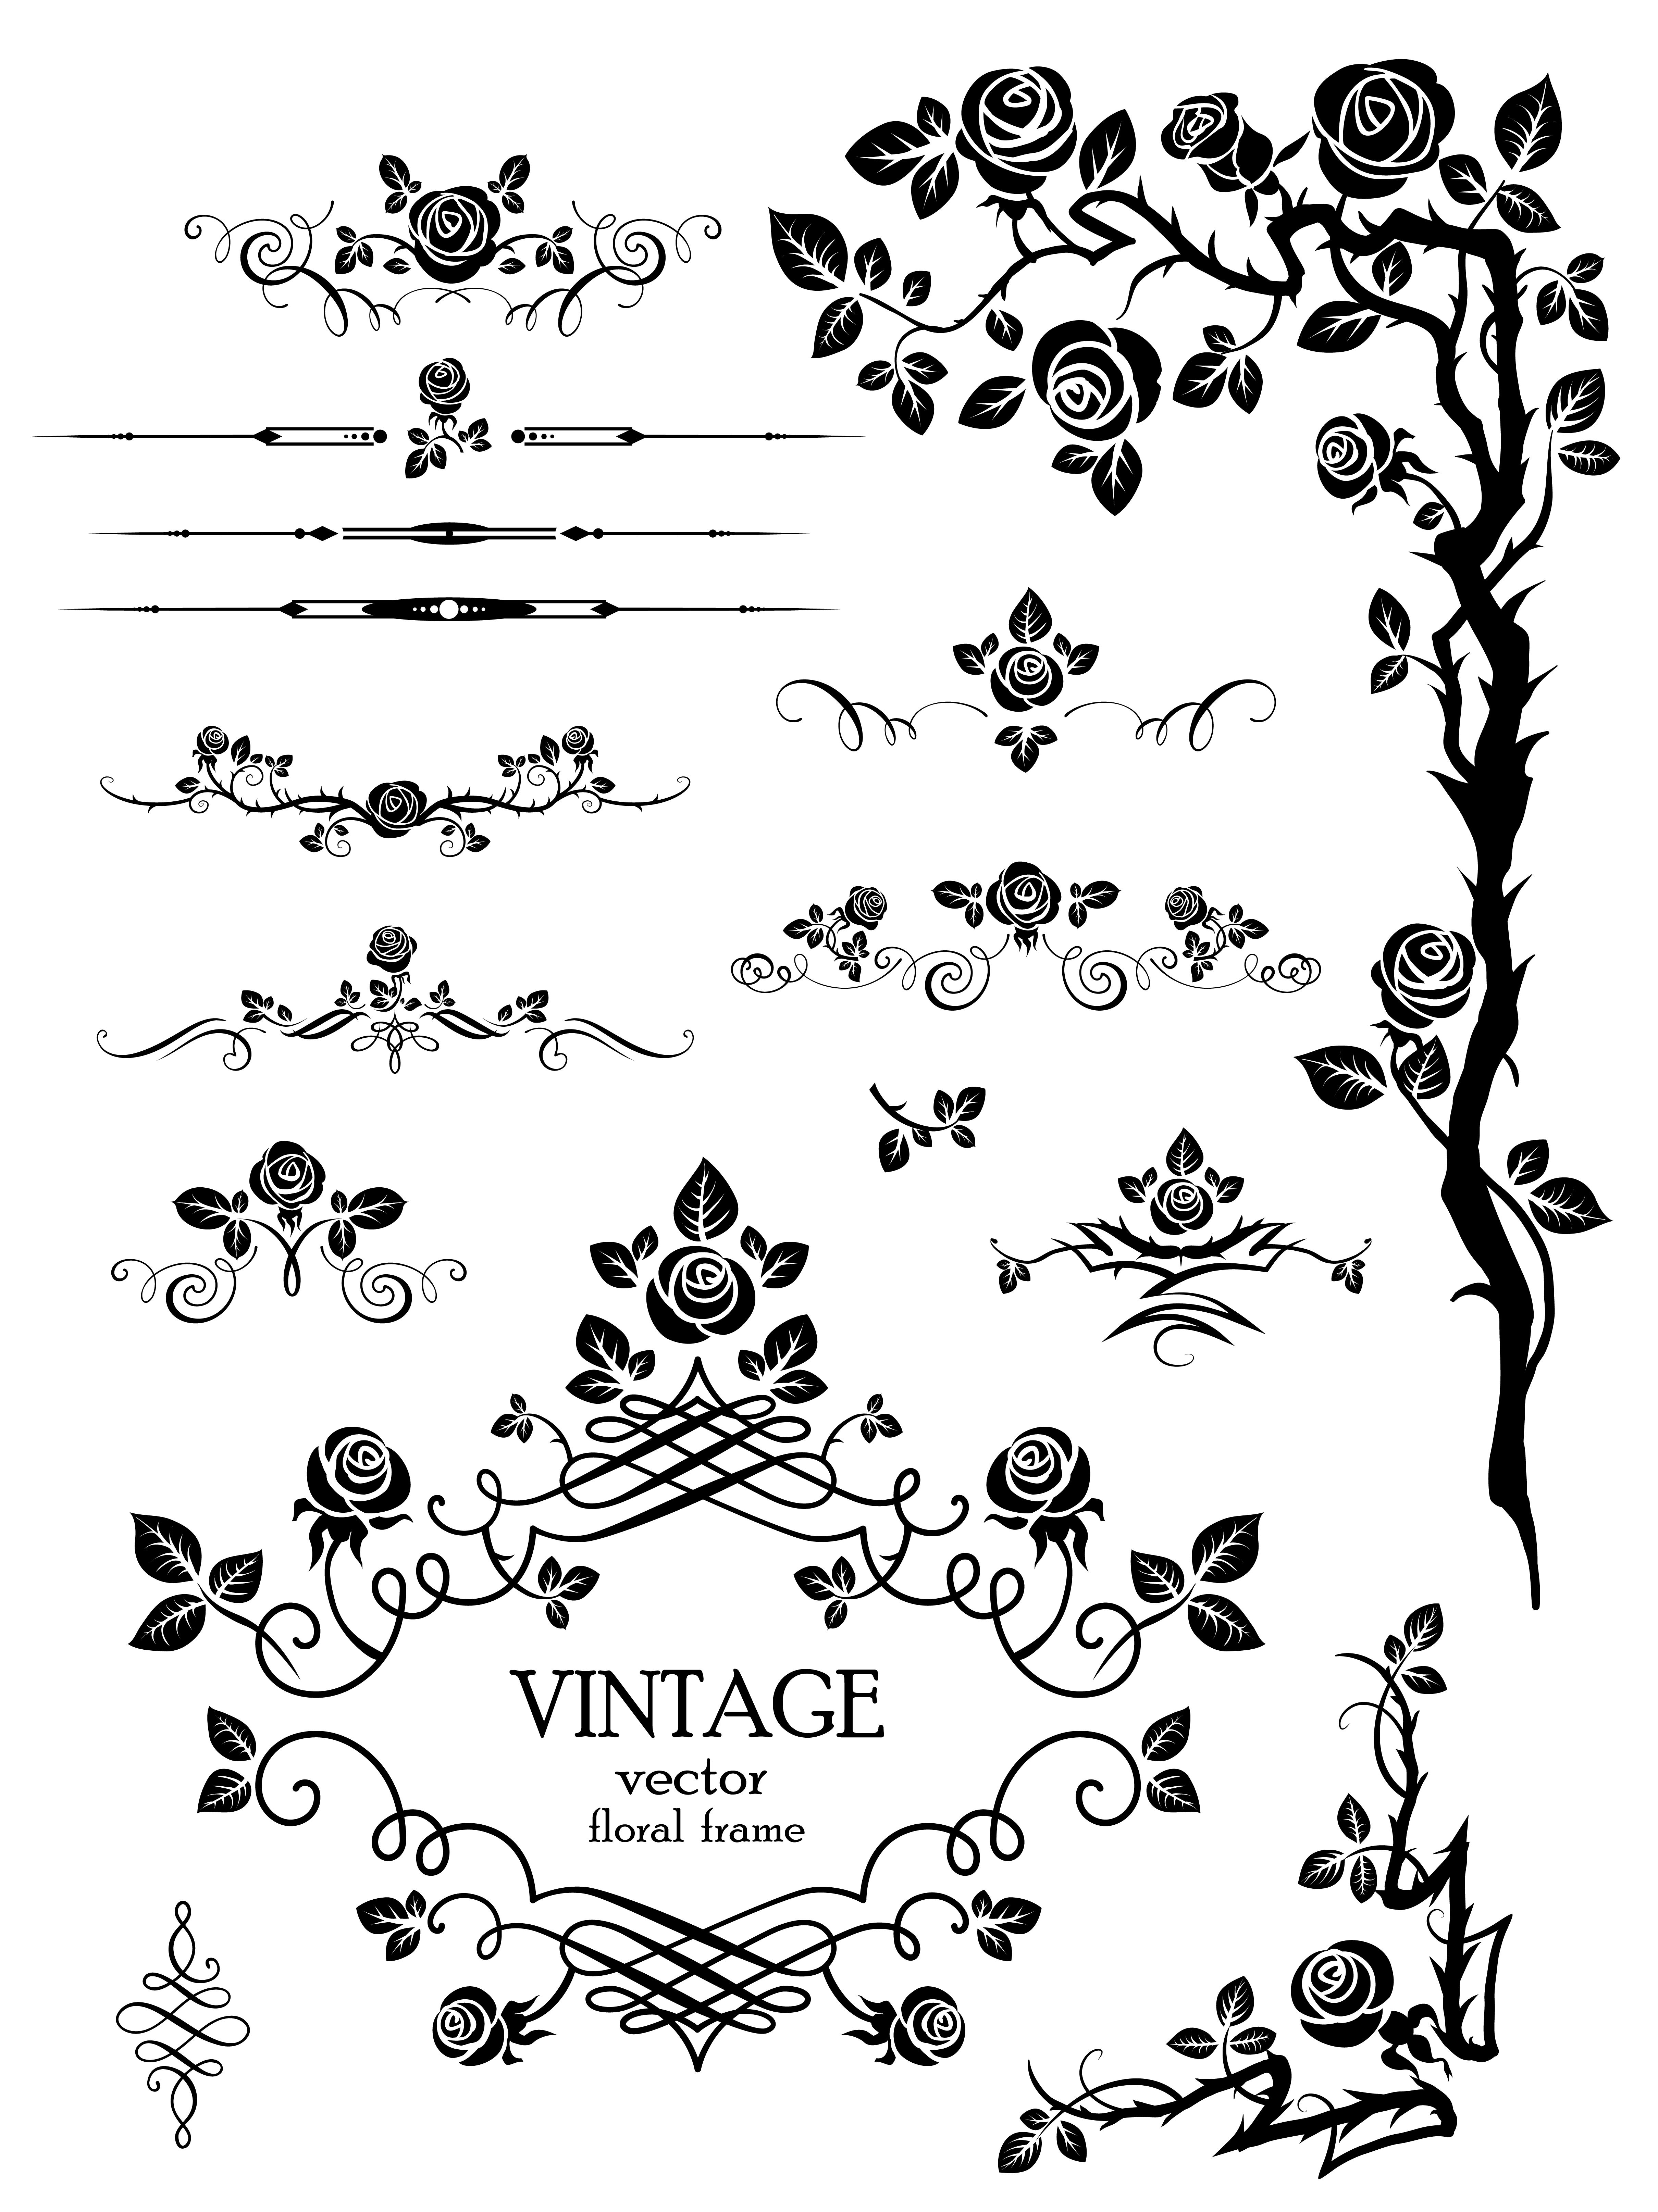 Flowers silhouette lace 03 vector Free Vector 